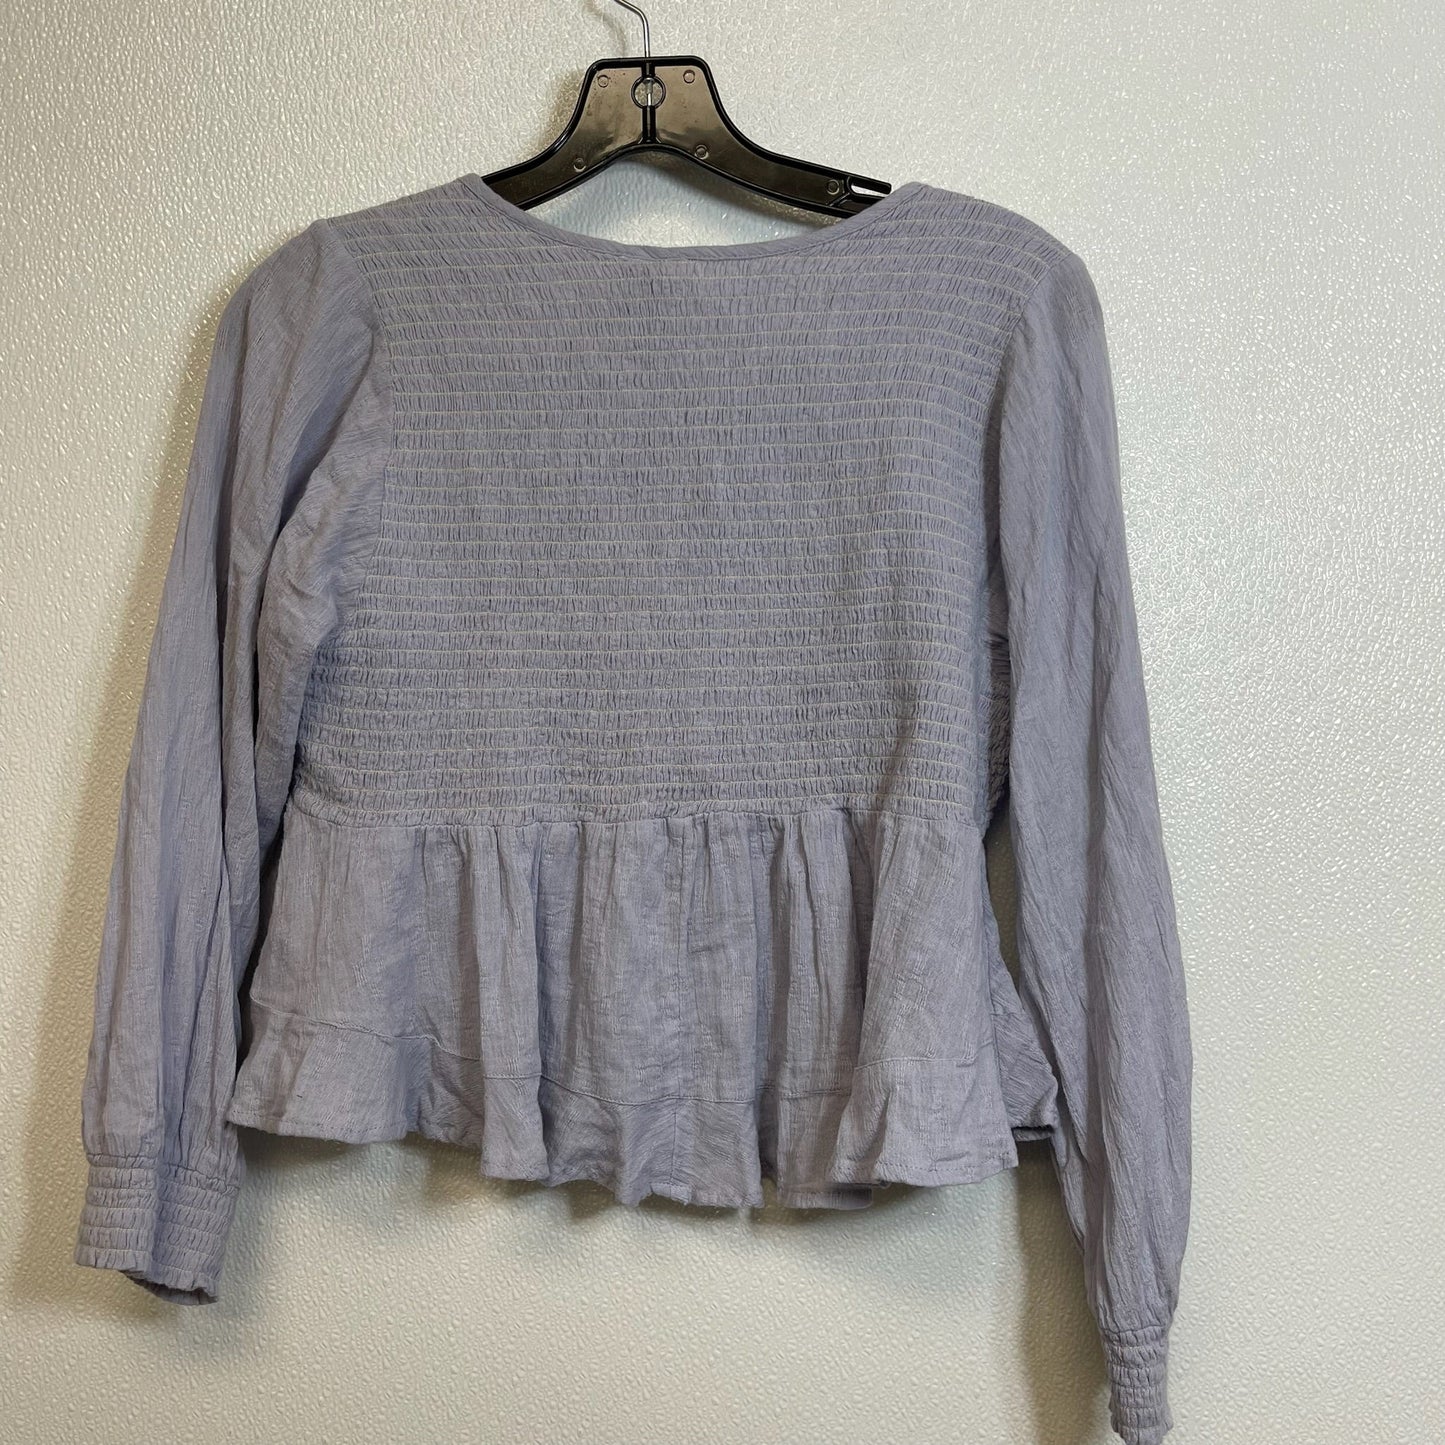 Lavender Top Long Sleeve Free People, Size M